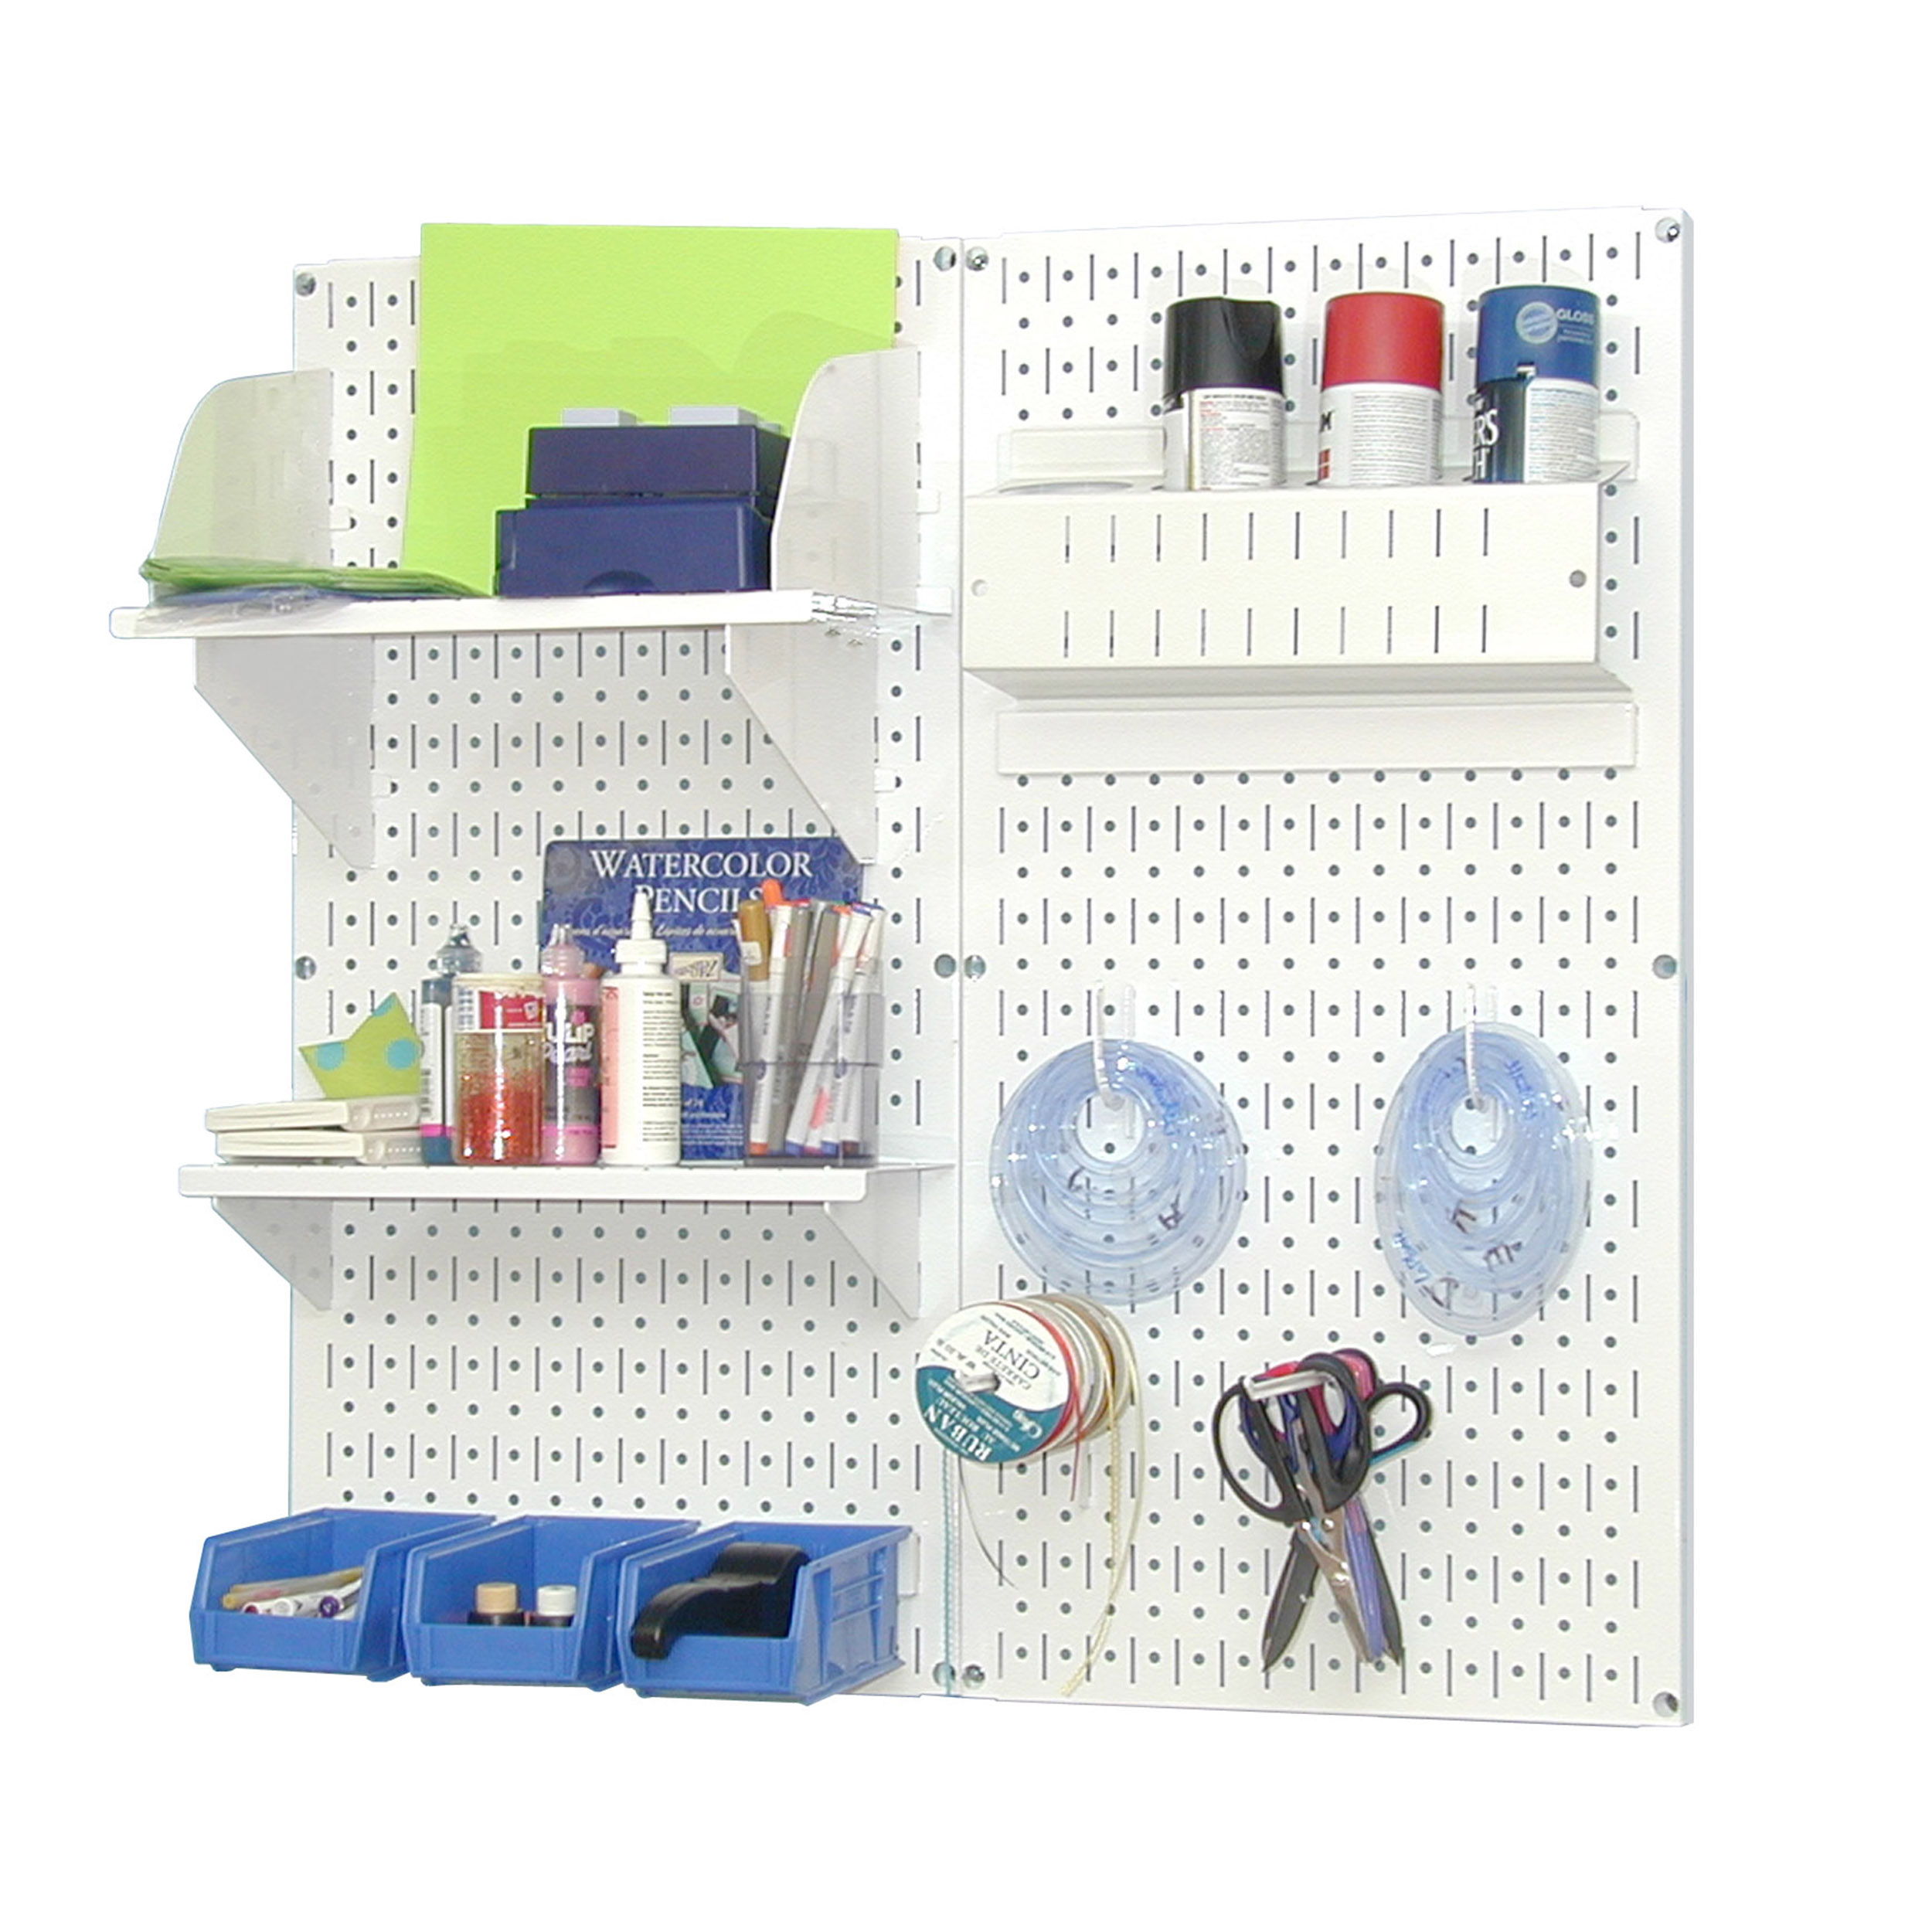 Pegboard Hobby Craft Pegboard Organizer Storage Kit With White Pegboard And White Accessories